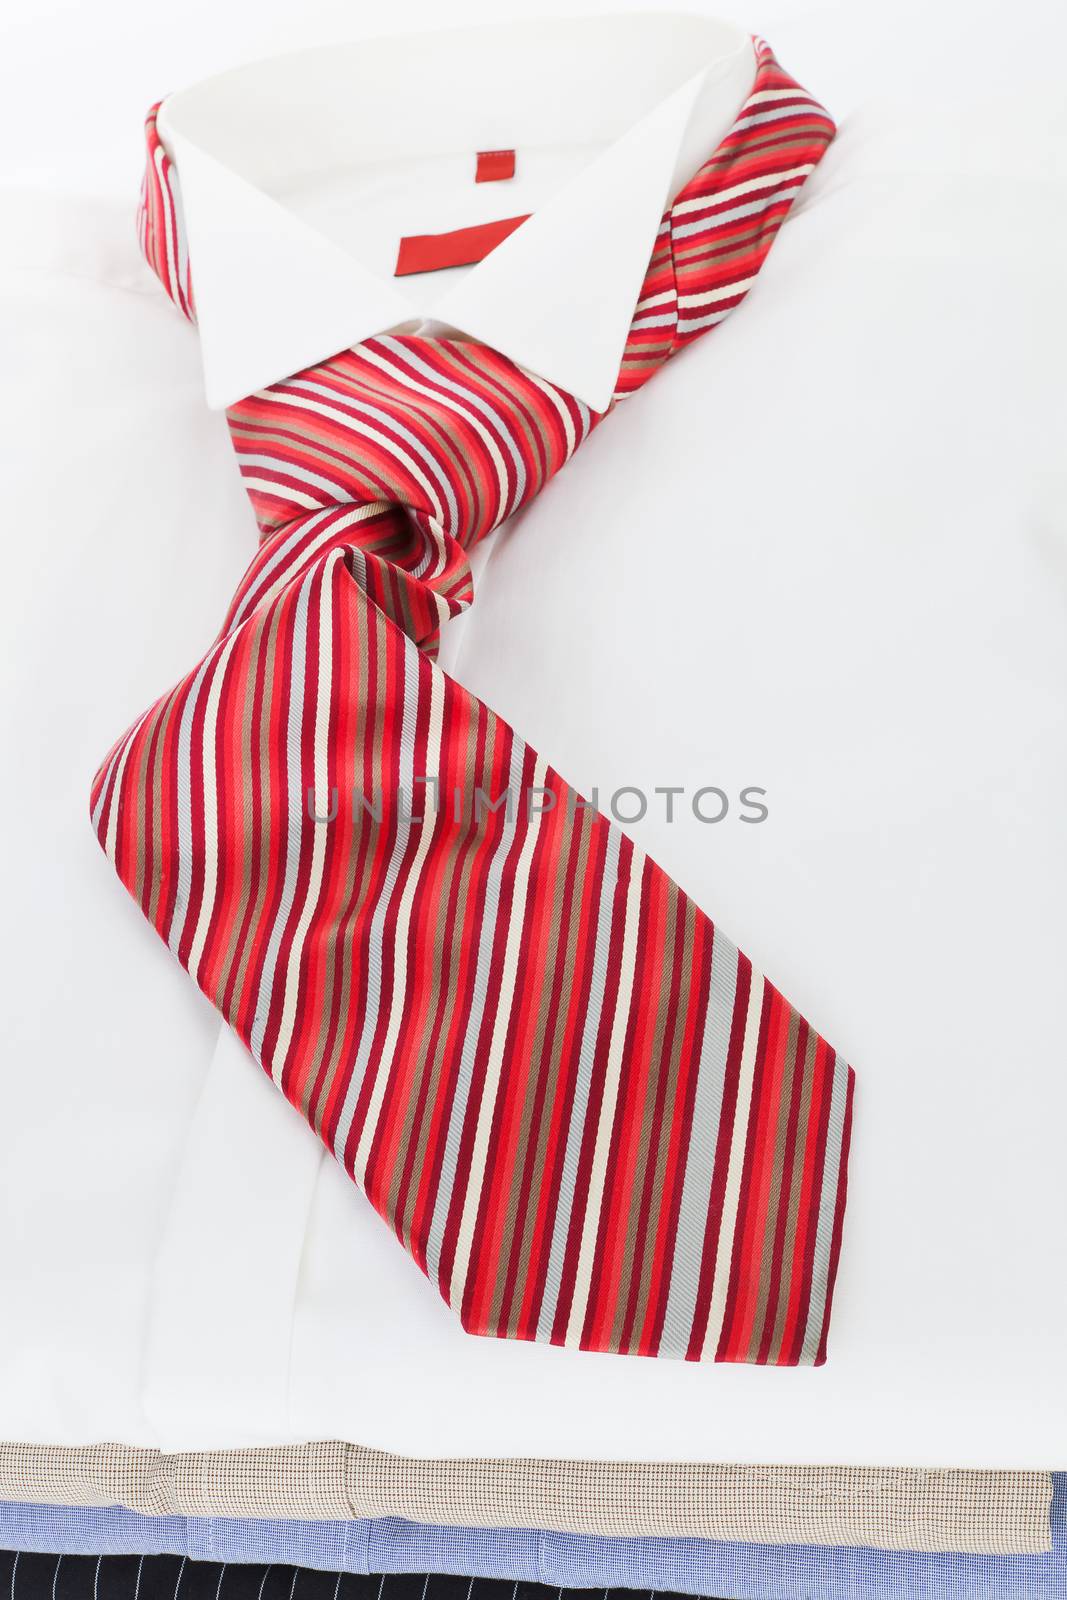 Dress shirt and tie. Business clothing. by eskymaks